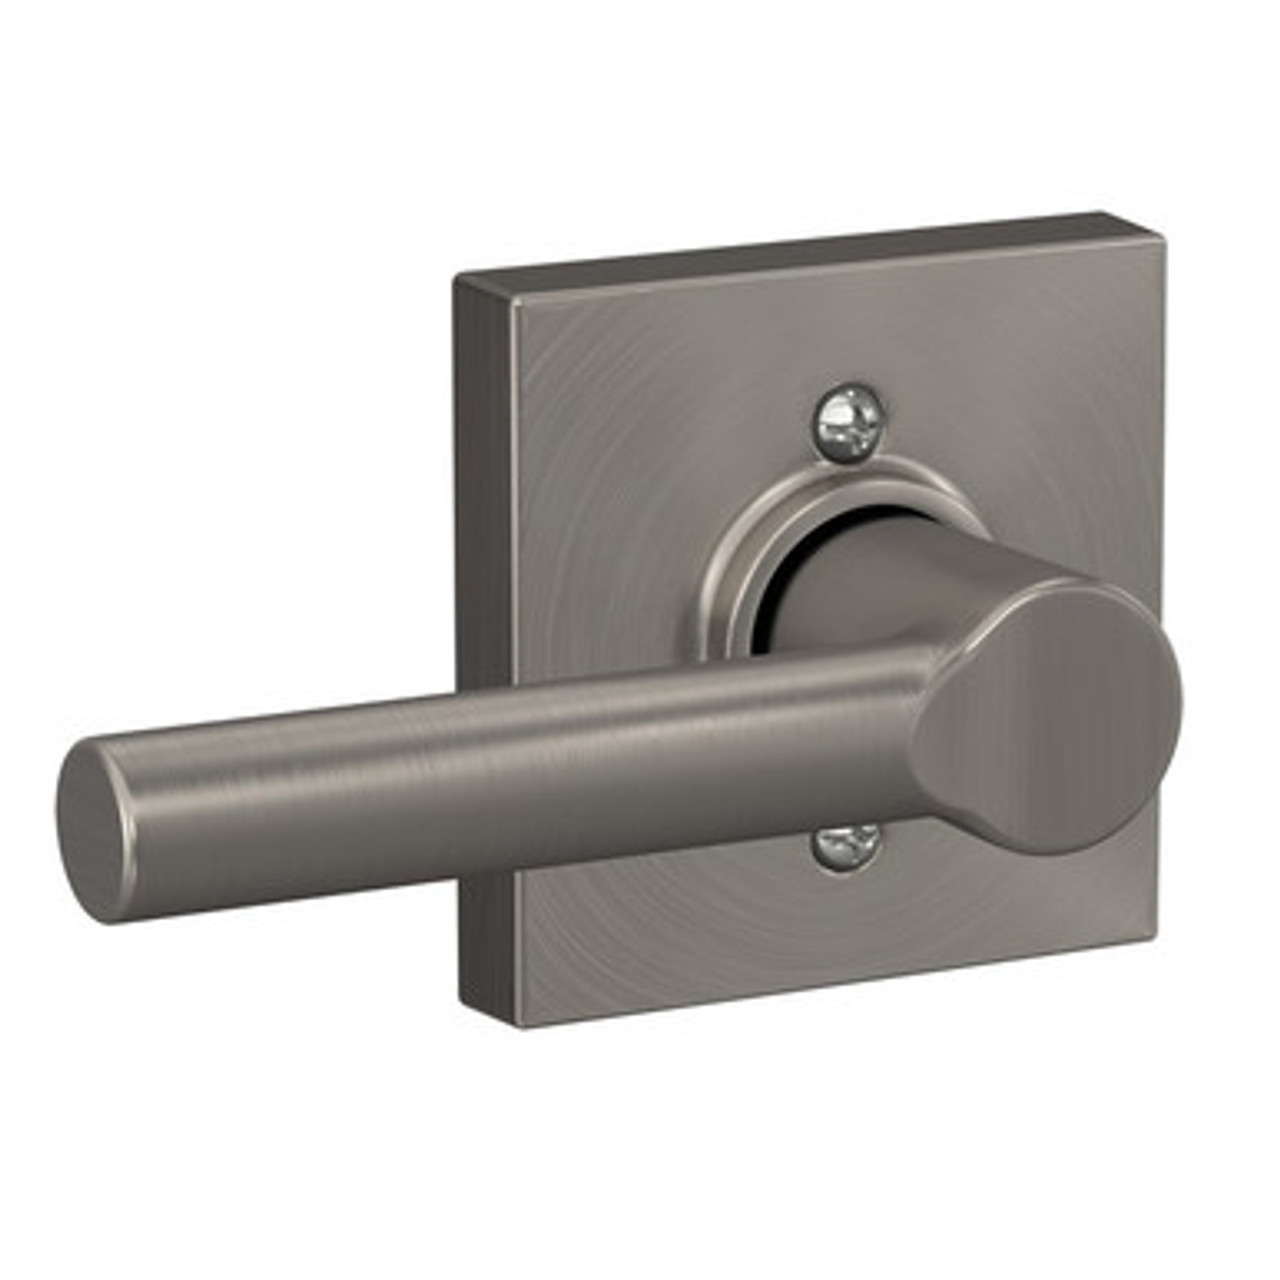 Schlage Broadway Lever Non-turning Lock with Collins Trim